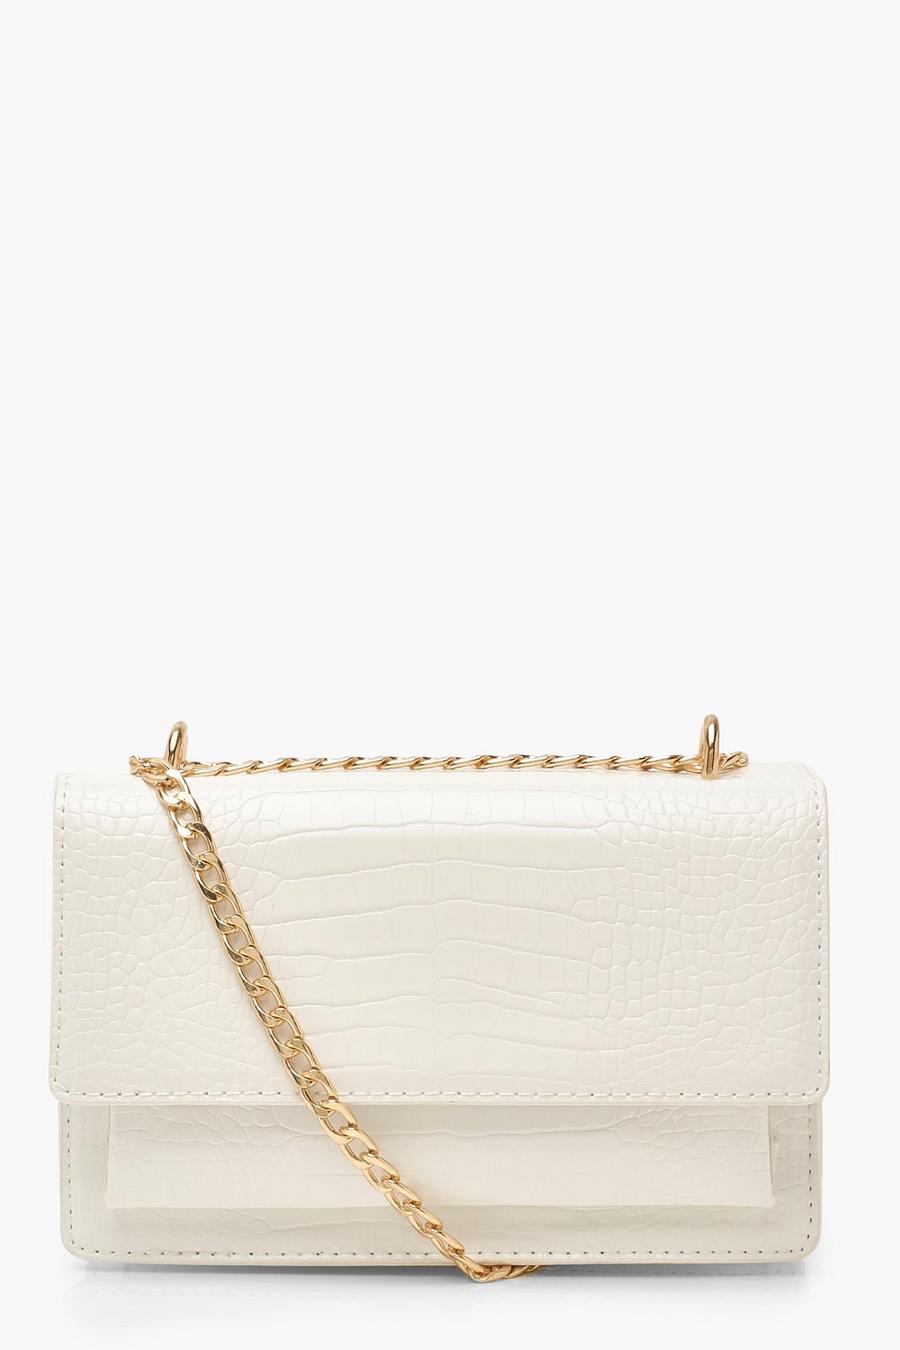 White Croc Structured Cross Body & Chain Bag image number 1